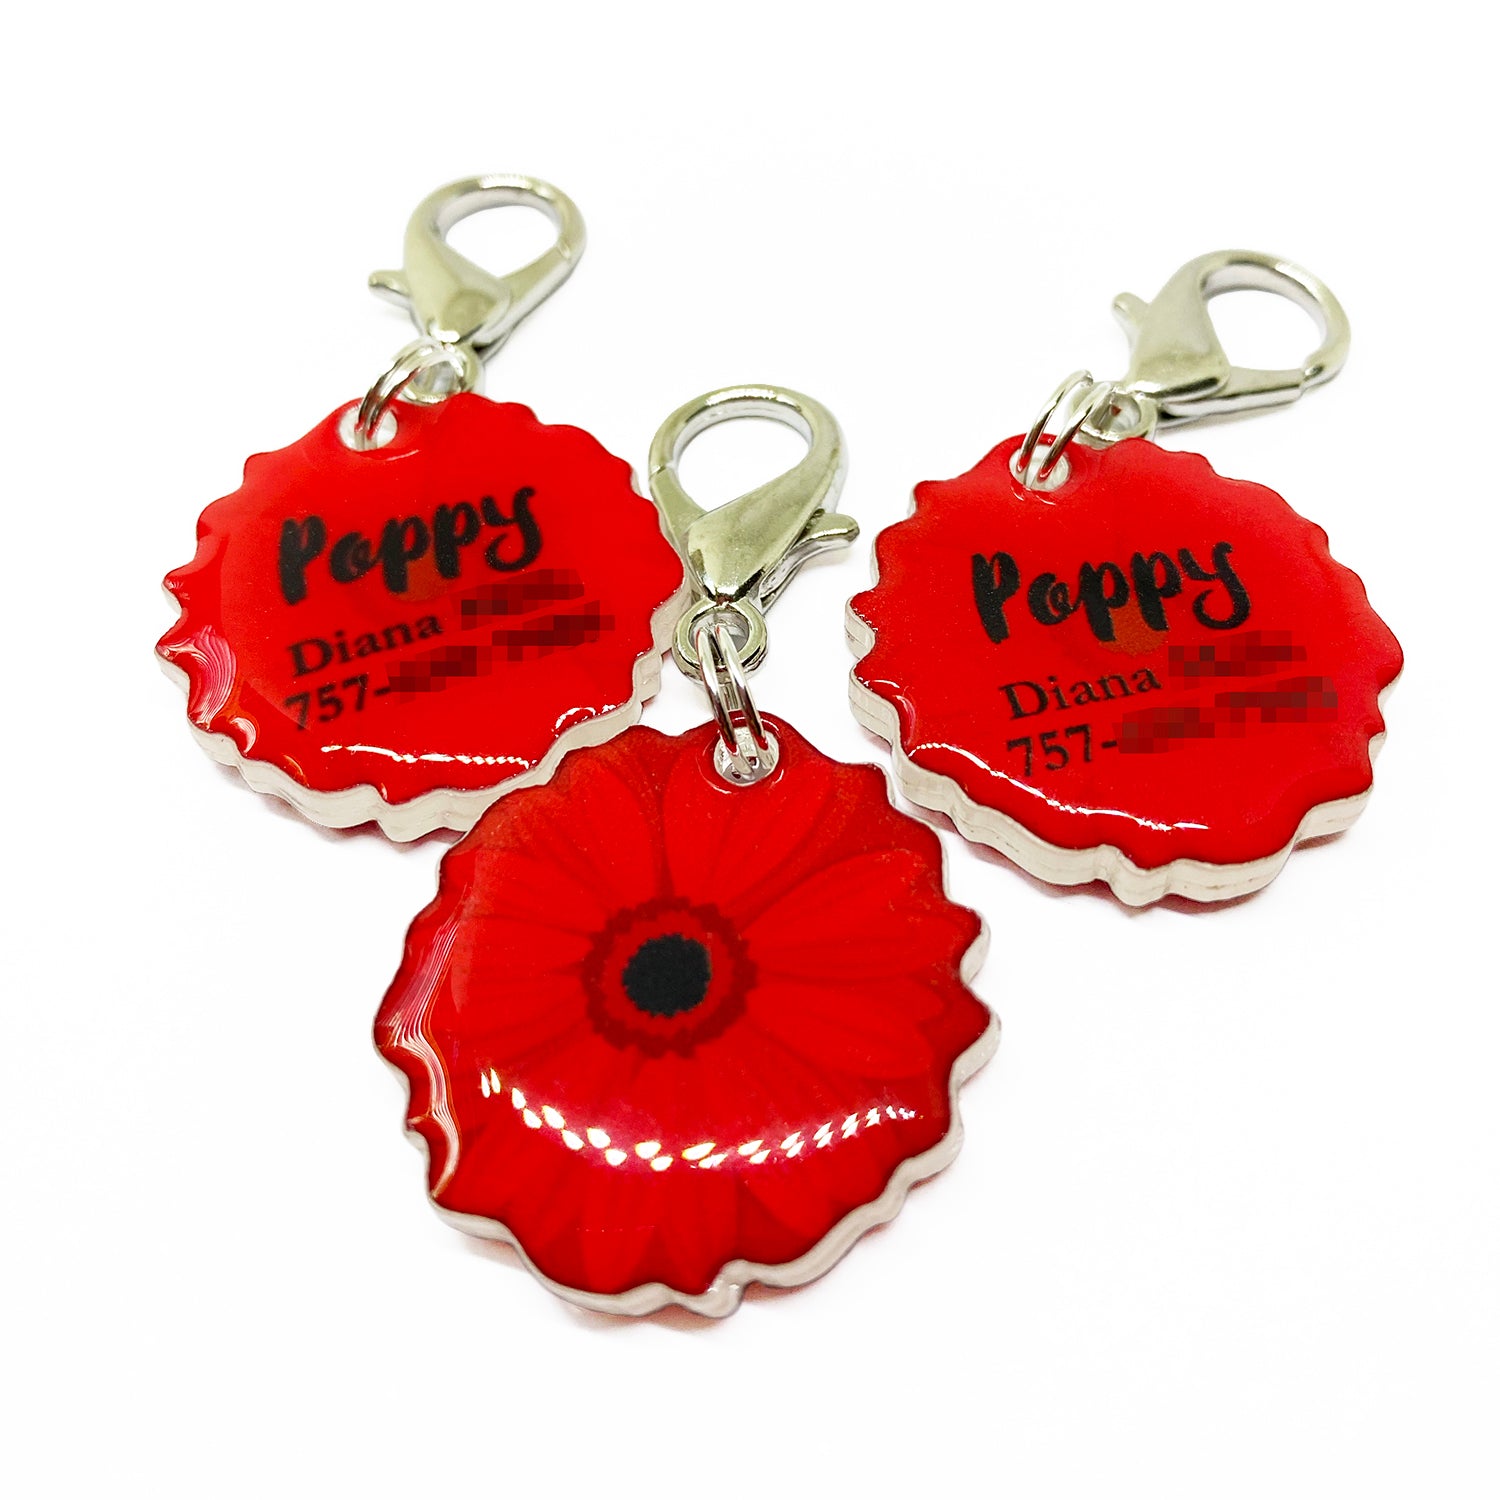 Lust Red Daisy - 2x Tags Dog Name Tags by Bashtags